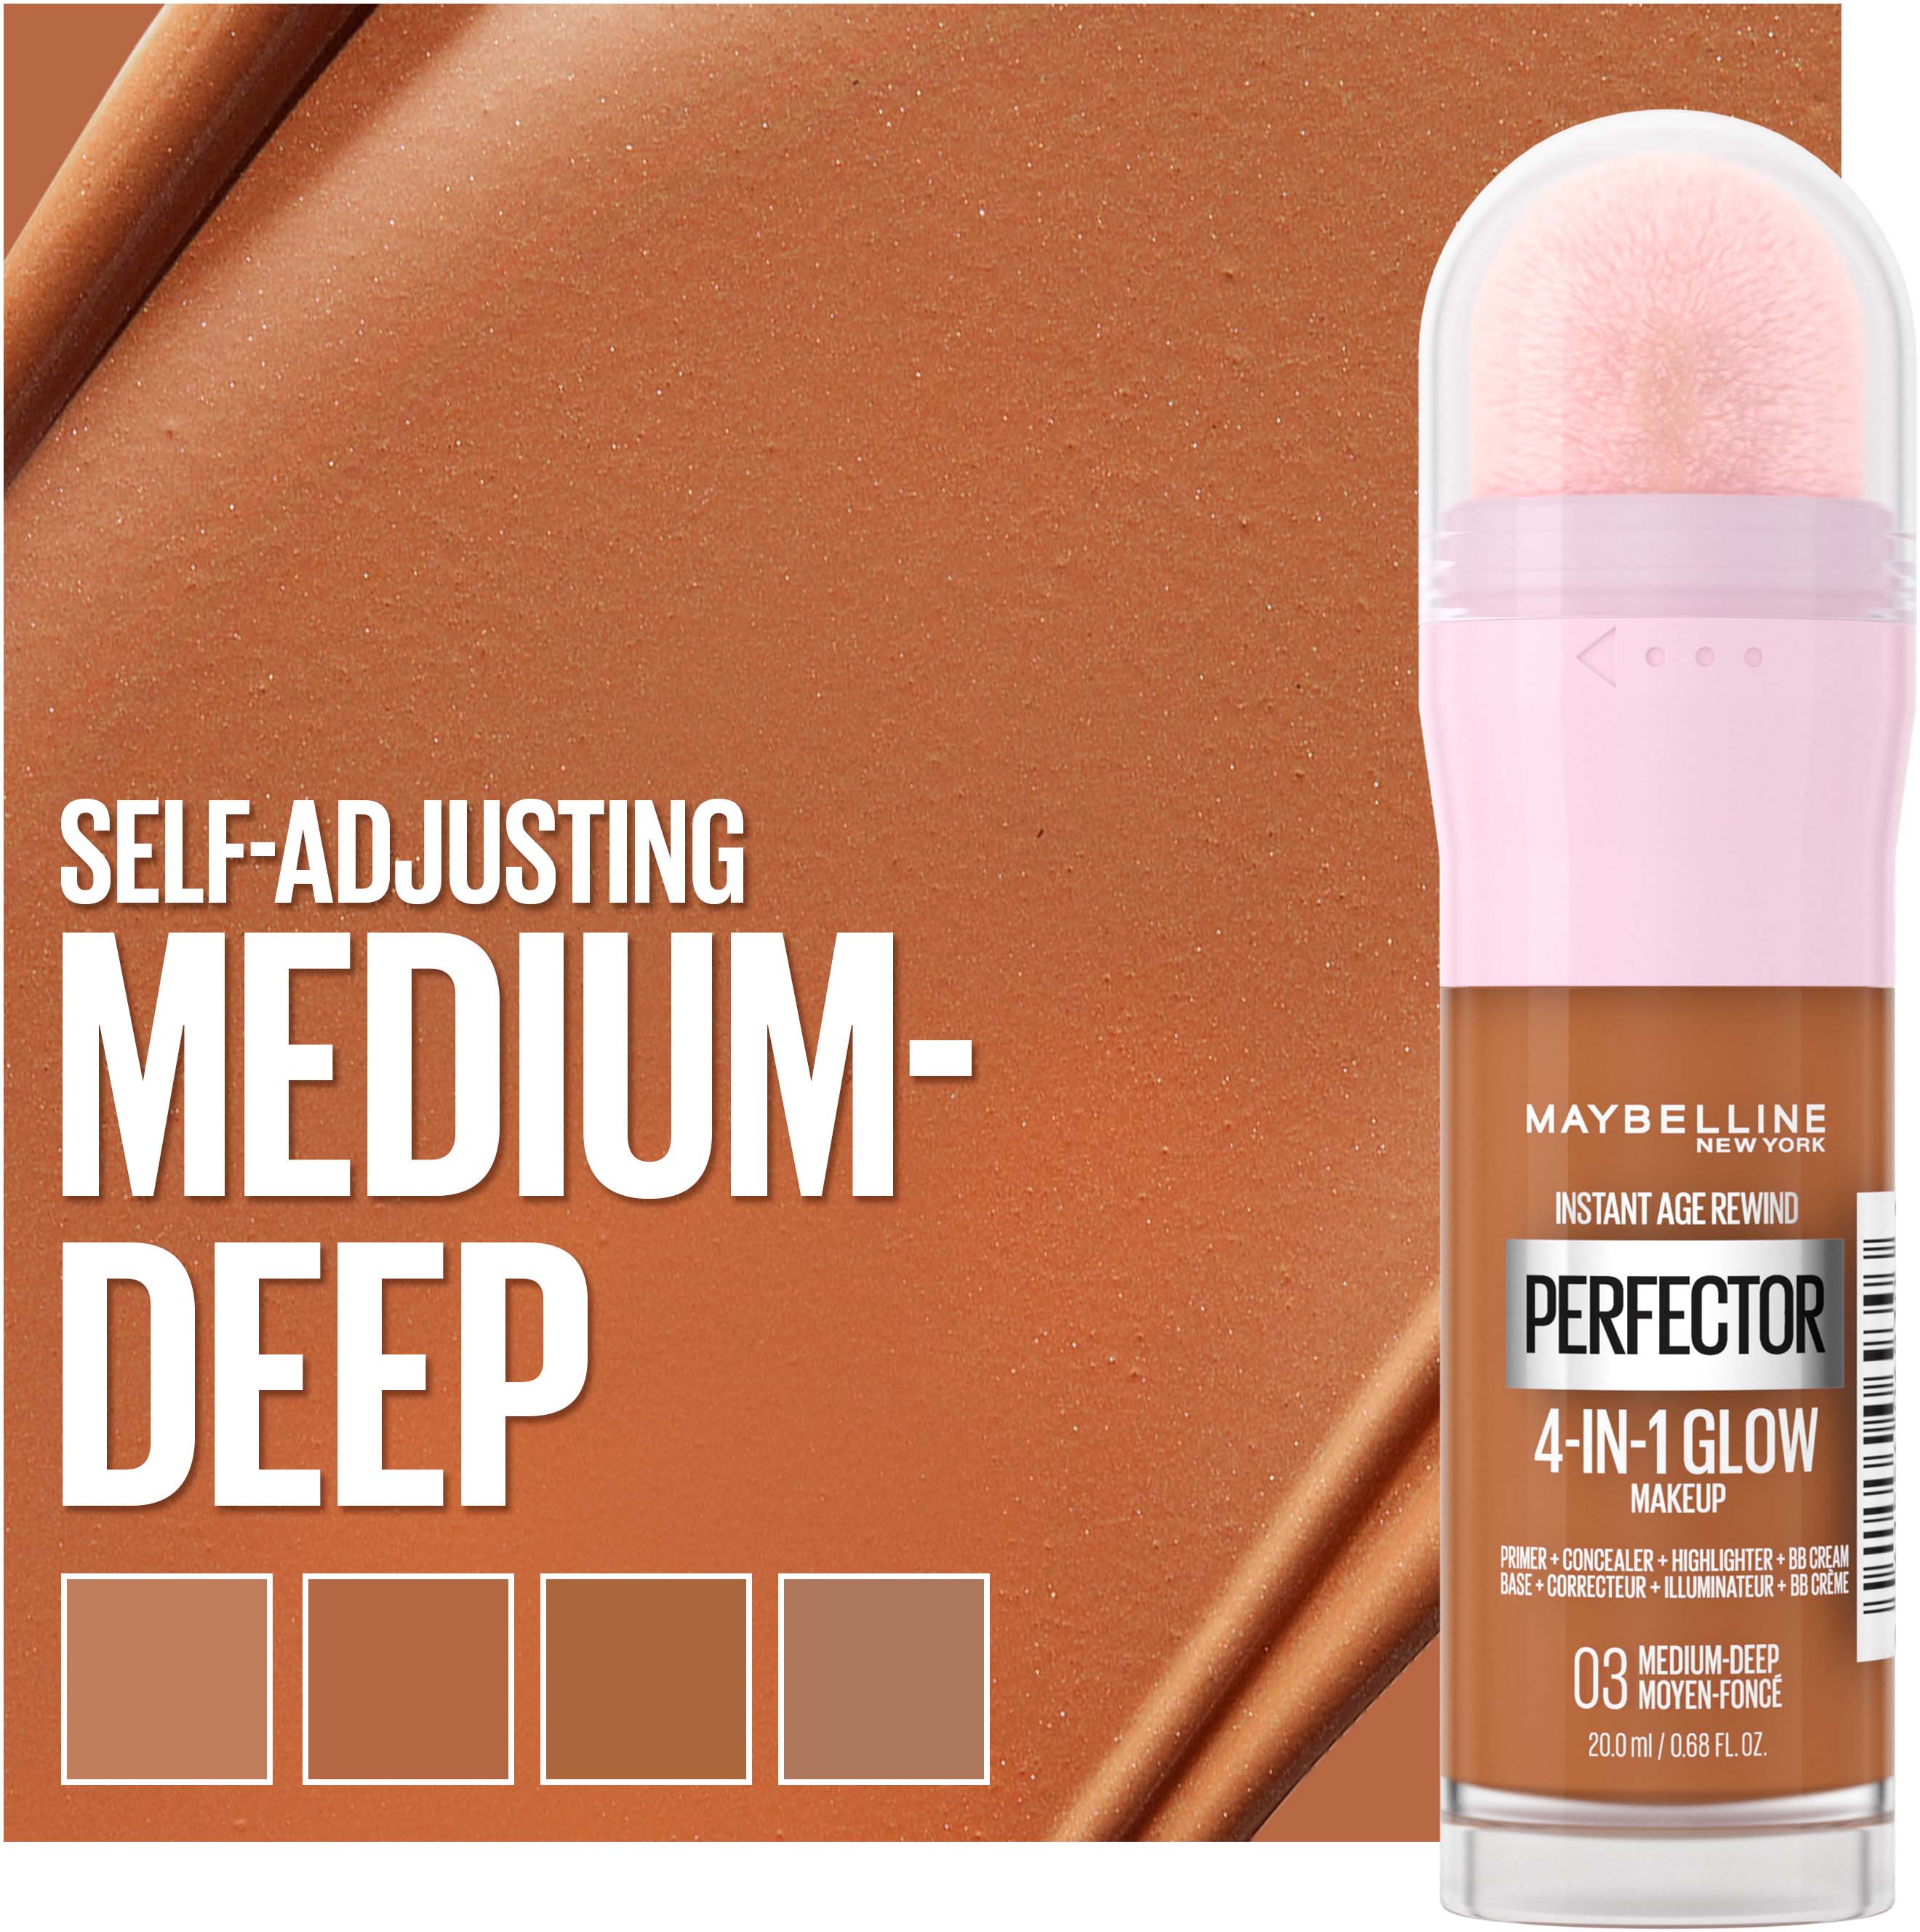 Makeup Glow Perfector Maybelline Medium New 4-in-1 Anti-Age 03 Instant Deep York